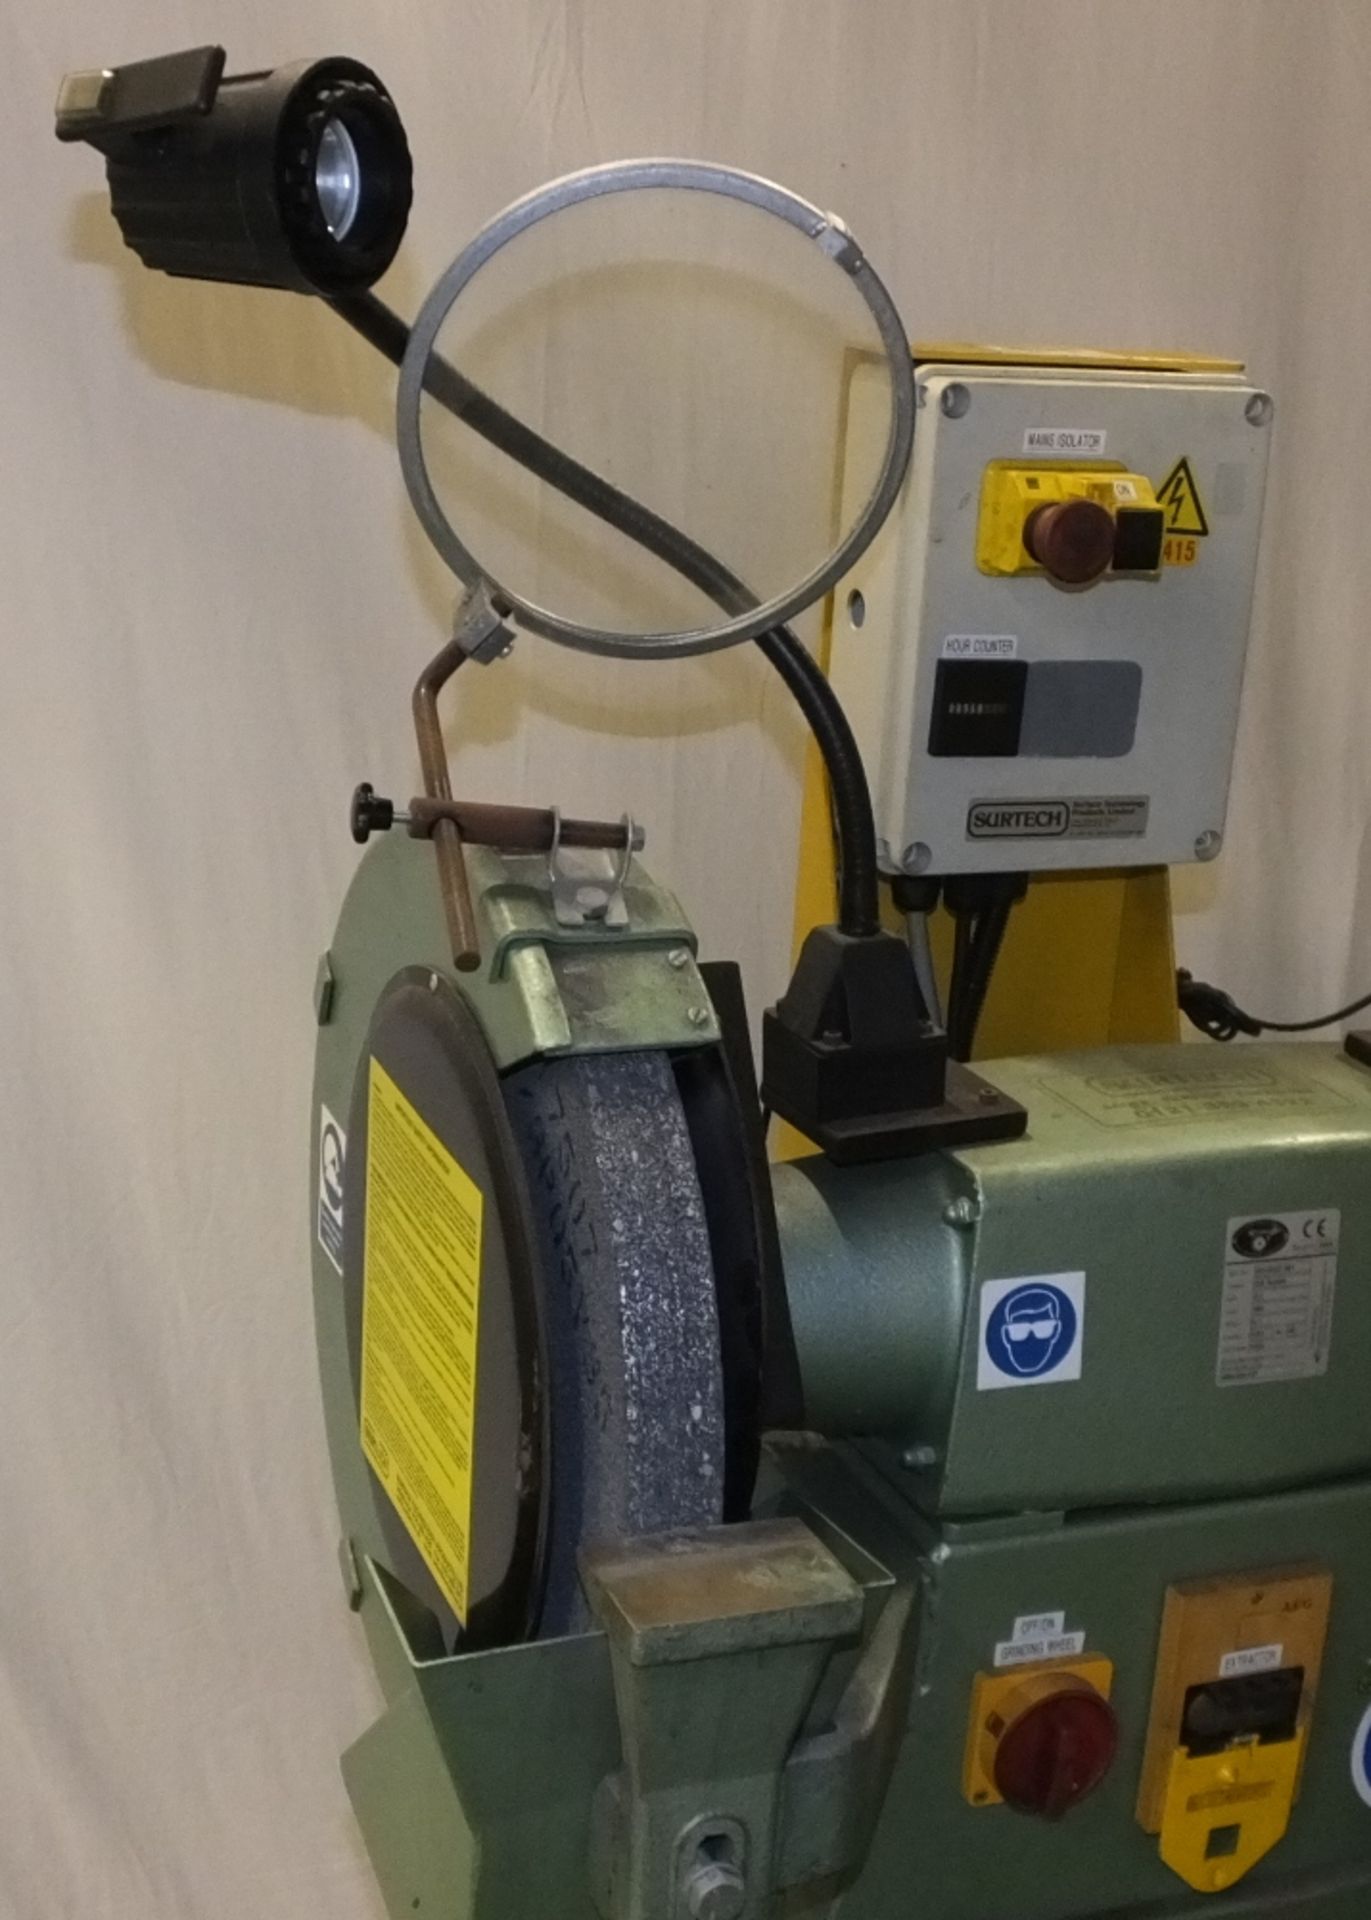 Roma Double Headed Grinder 30/40 - 400V - 5.1A - Serial 0512032.001 - hours run 40 - £5 Lo - Image 3 of 8